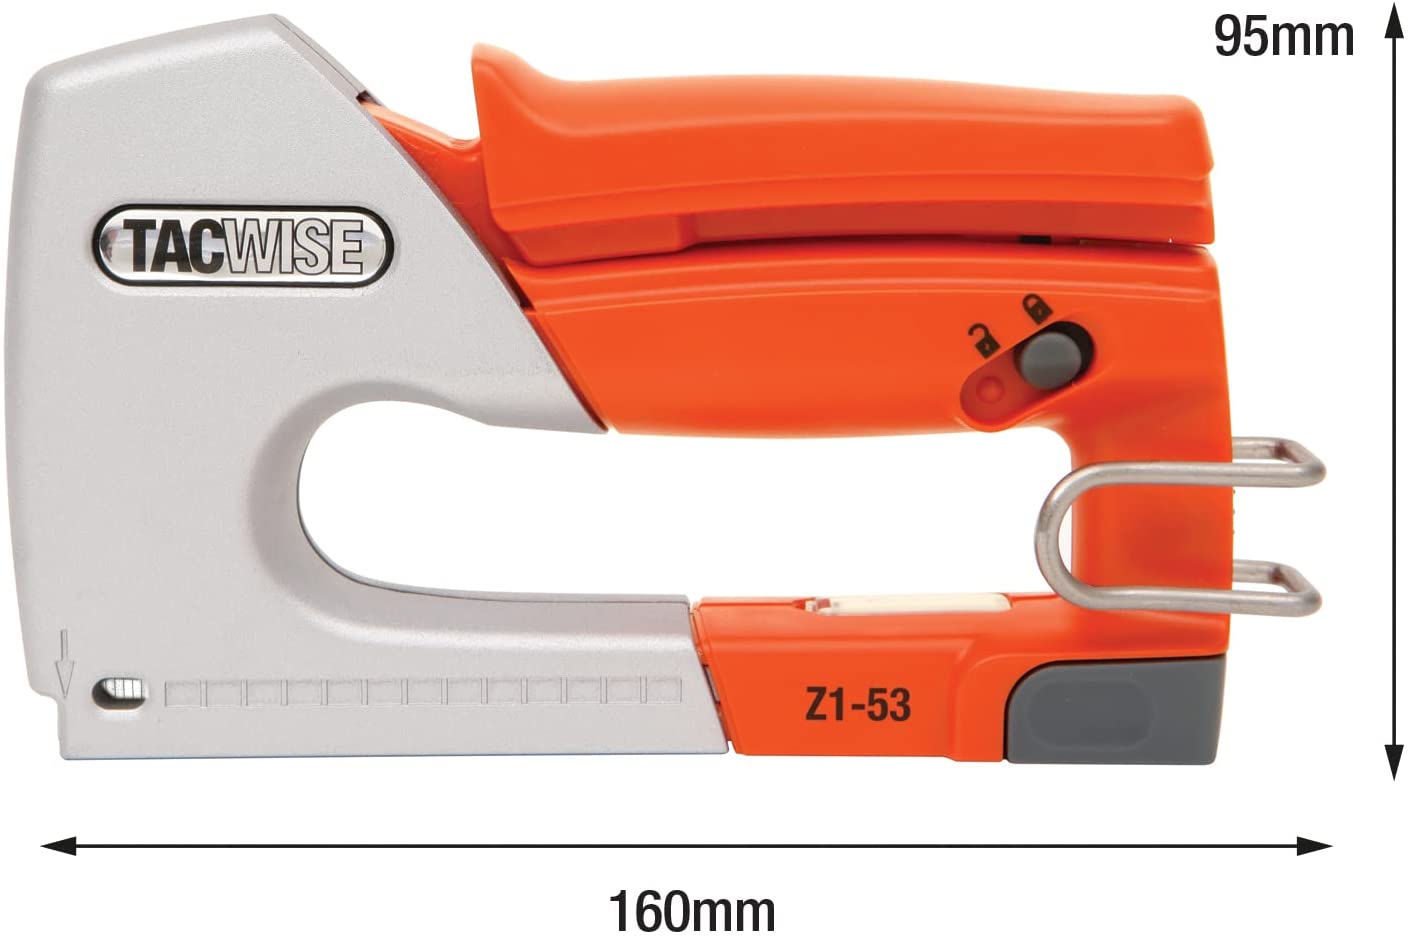 Tacwise 0889 Z1-53 Heavy Duty Metal Staple Gun with 200 Staples, Staple Remover